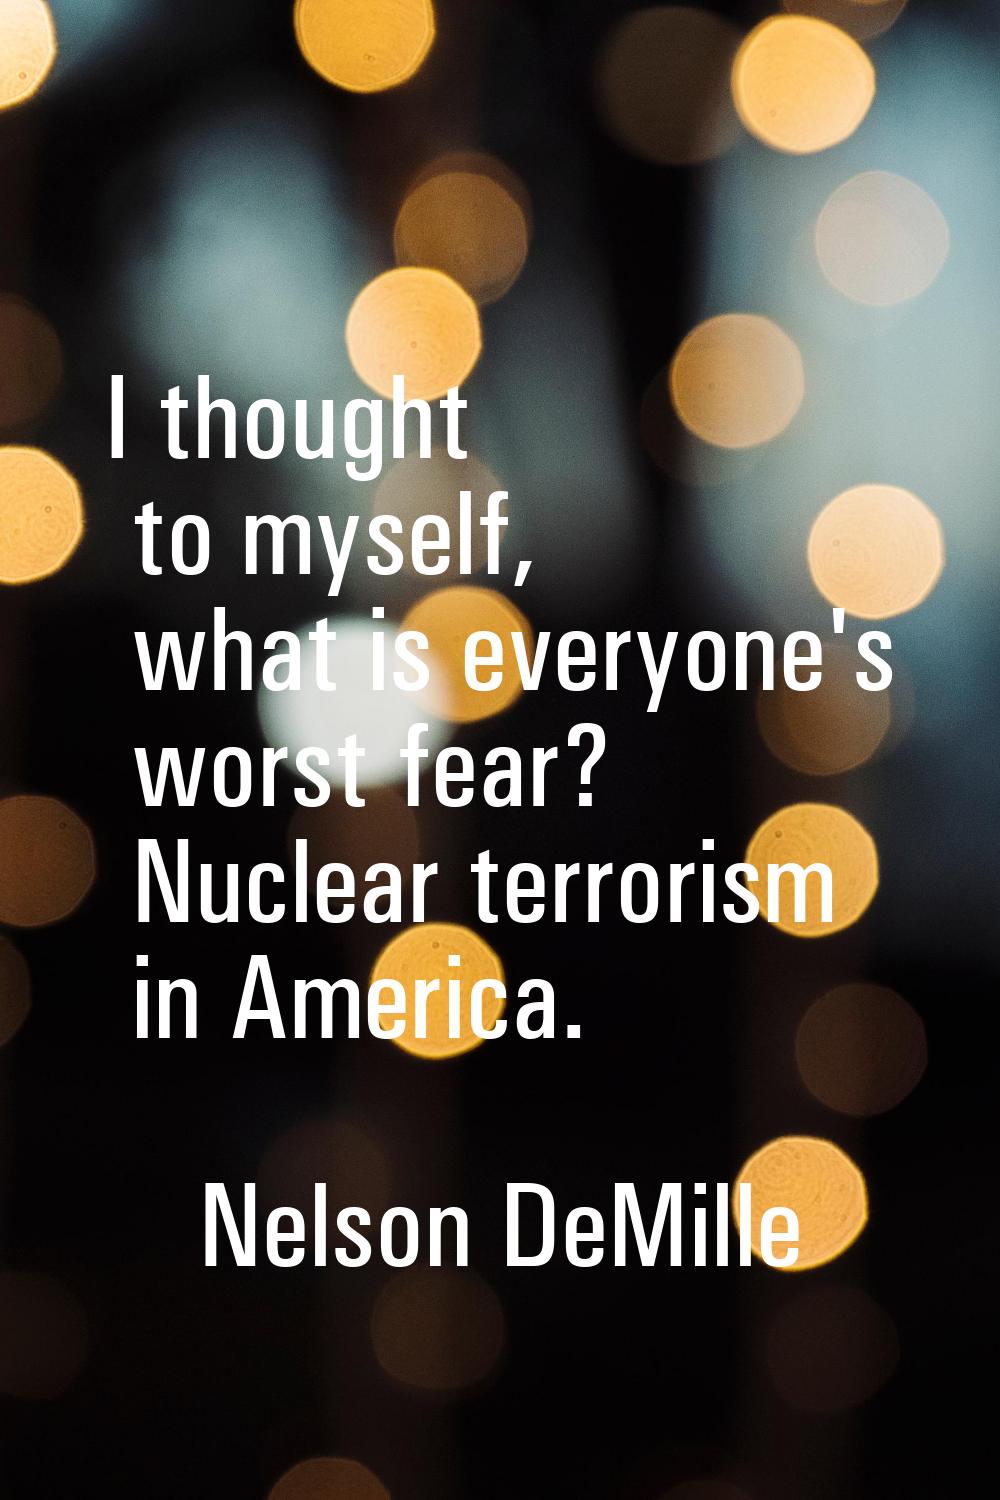 I thought to myself, what is everyone's worst fear? Nuclear terrorism in America.